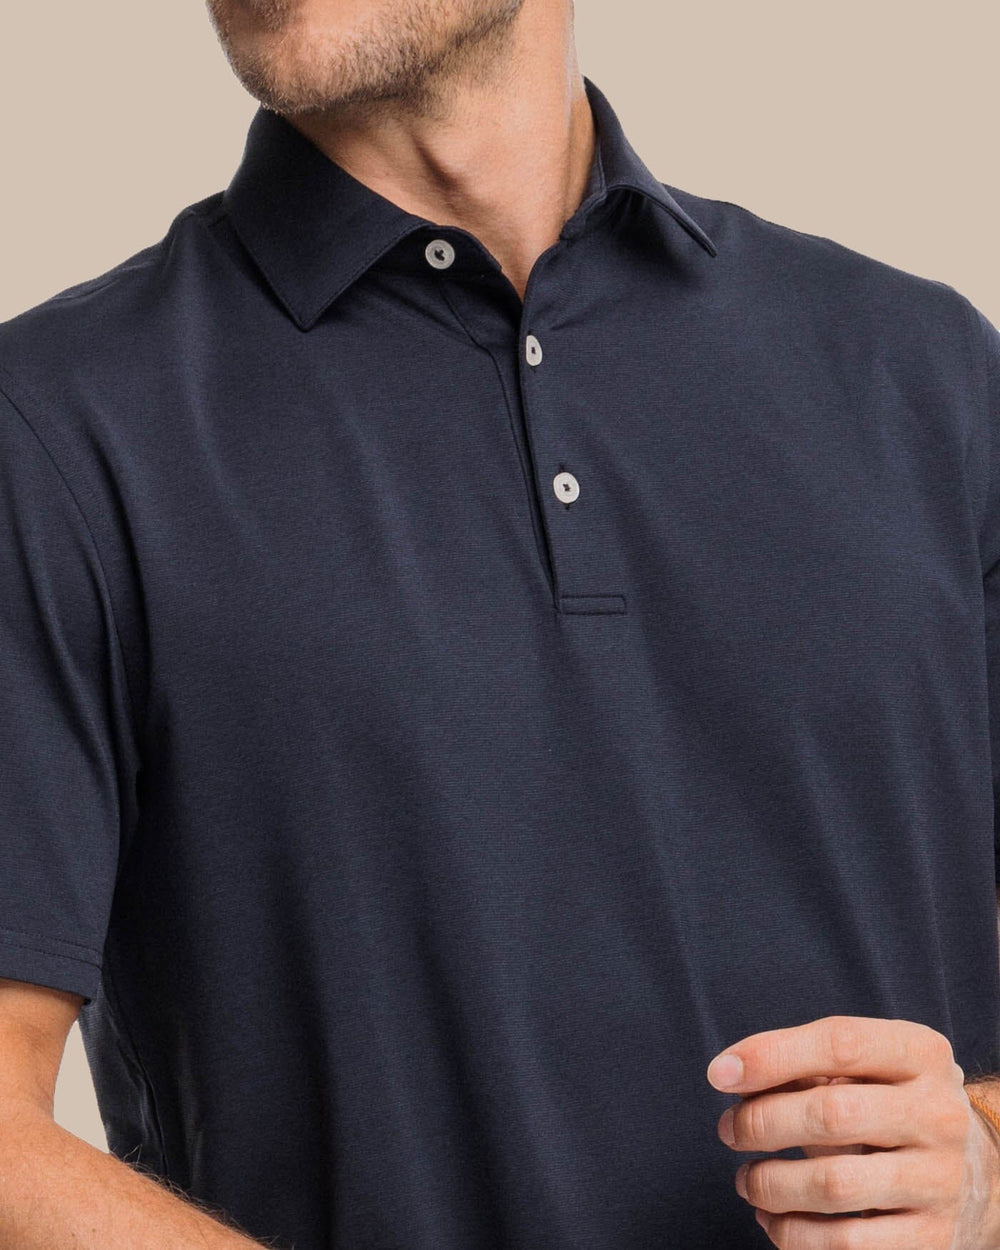 The detail view of the Southern Tide brrr-eeze Heather Performance Polo Shirt by Southern Tide - Heather Caviar Black